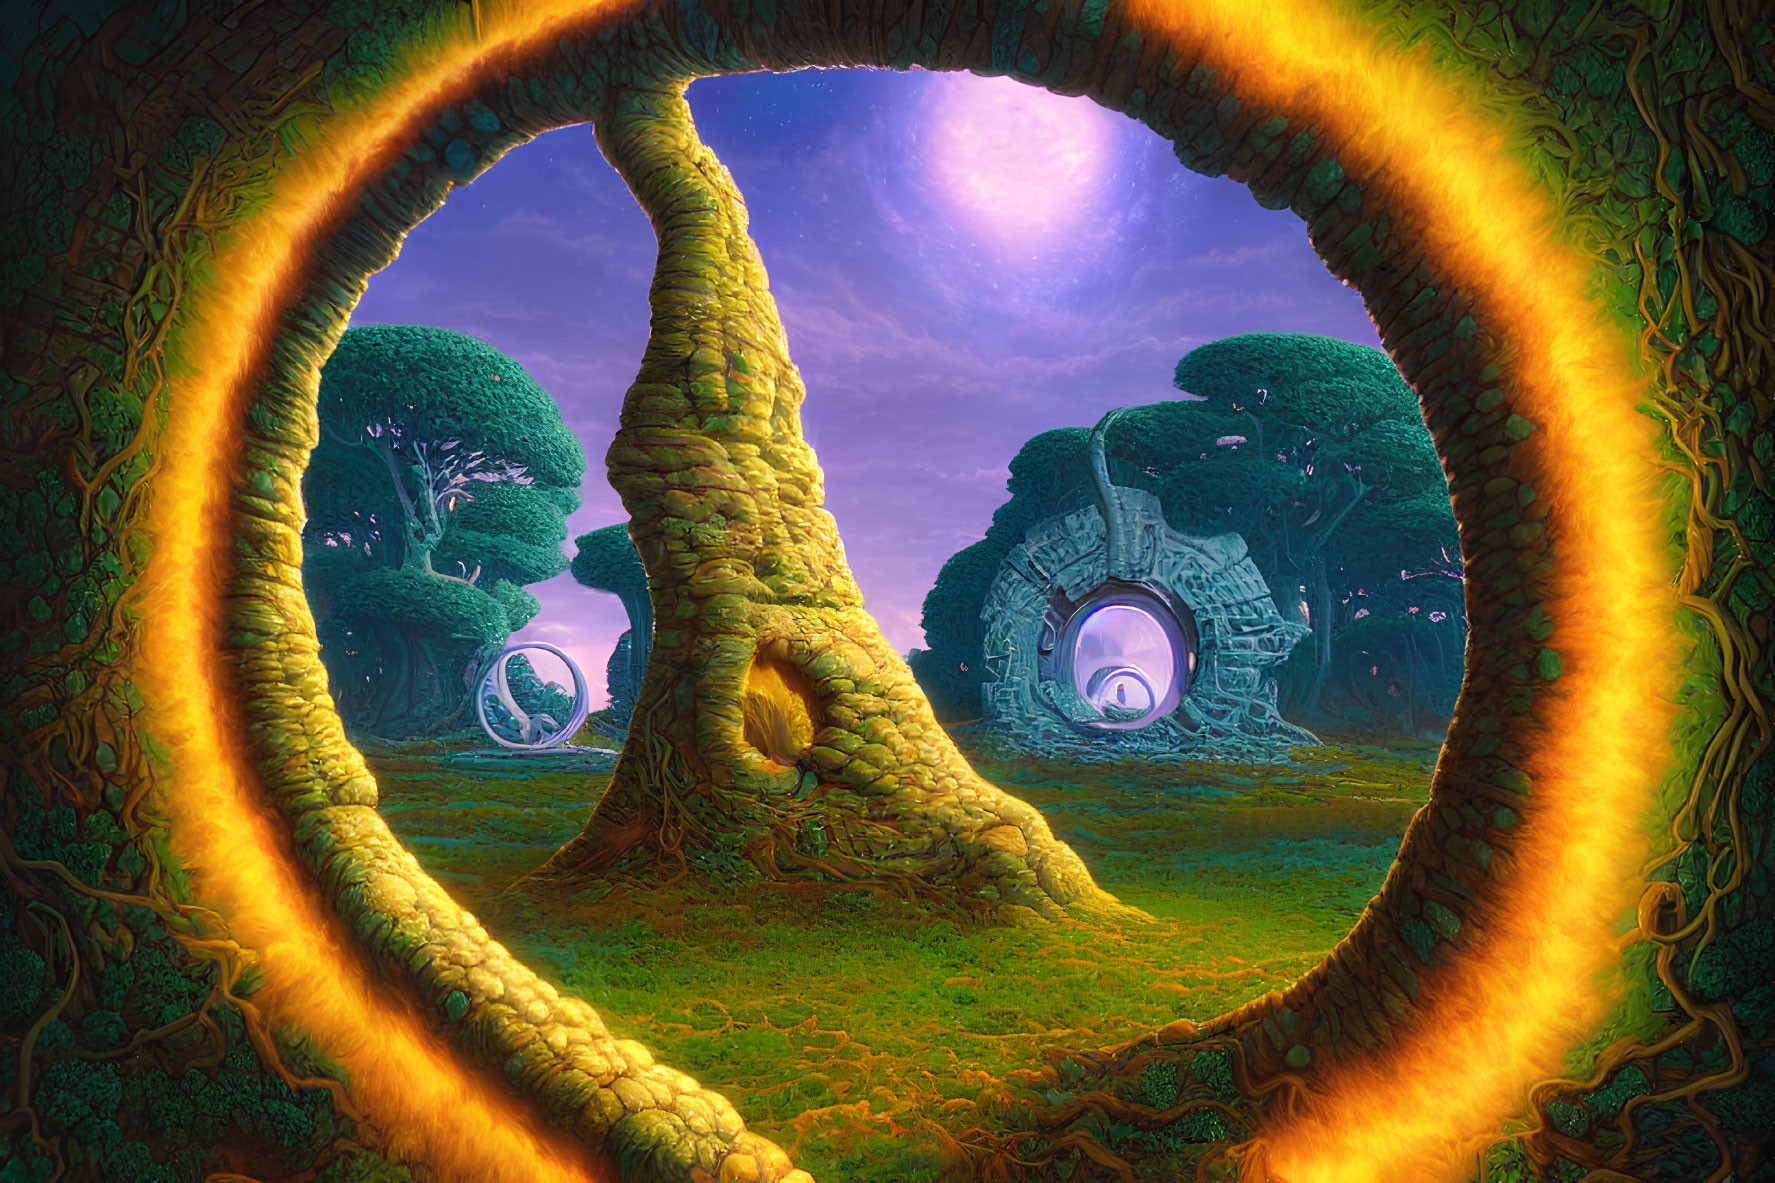 Fantastical Landscape with Spiraled Tree and Portals in Dreamlike Setting